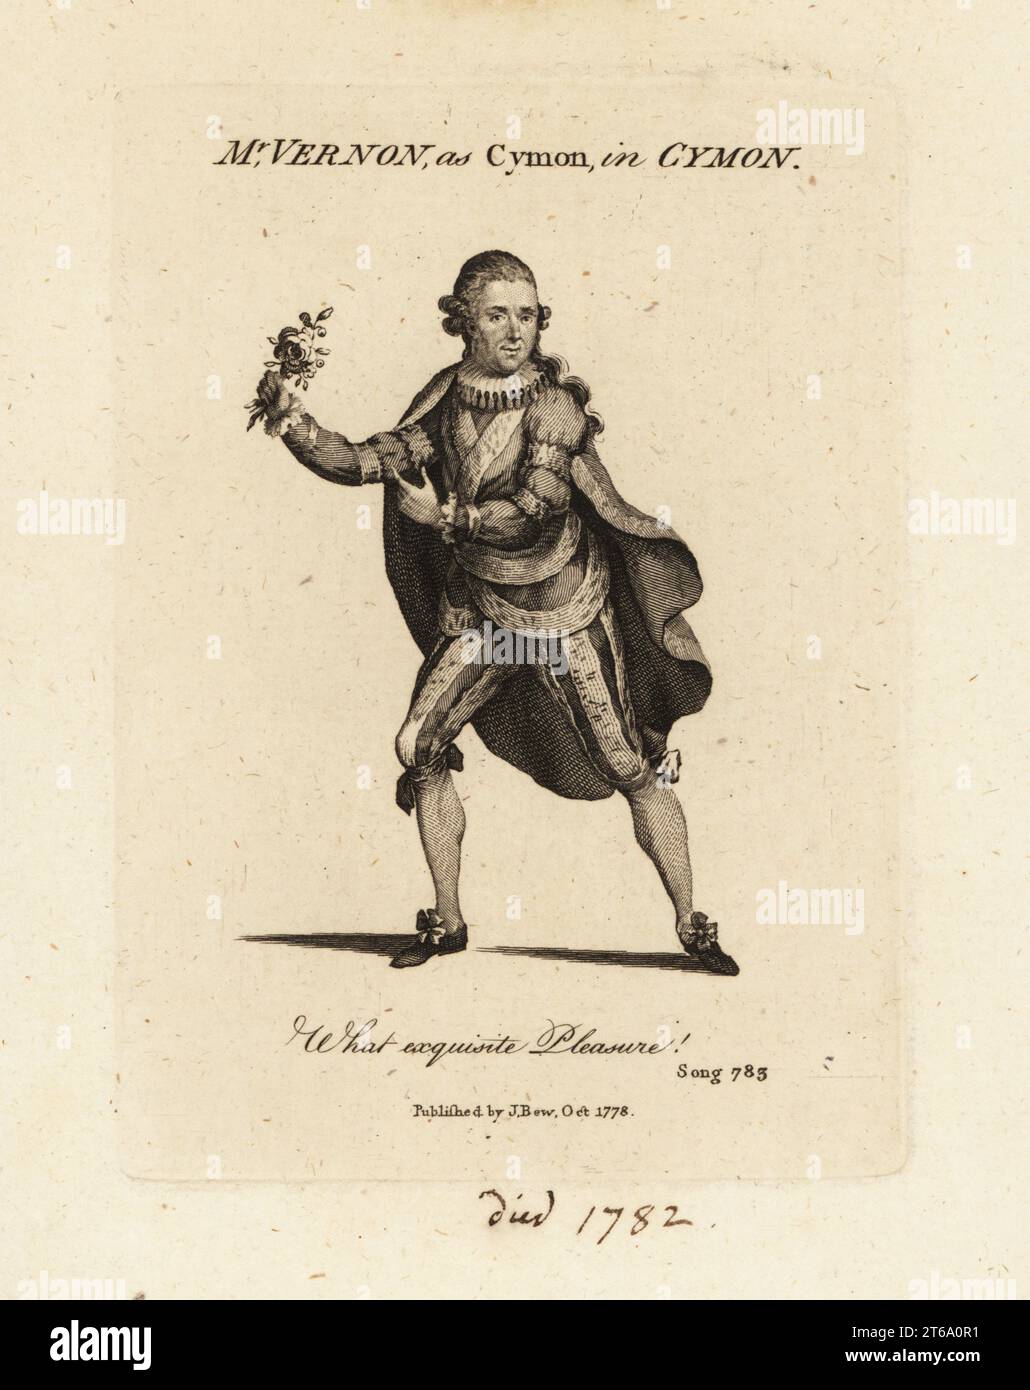 Mrs. Joseph Vernon as Cymon singing Thomas Arnes cantata Cymon and Iphigenia. He holds a rose and wears a cape, ruff, doublet and breeches. Vernon (1731-1782), actor and singer who appeared in Queen Mab and The Beggar's Opera. Copperplate engraving from the 'Vocal Magazine' published by J. Bew, 1778. Stock Photo